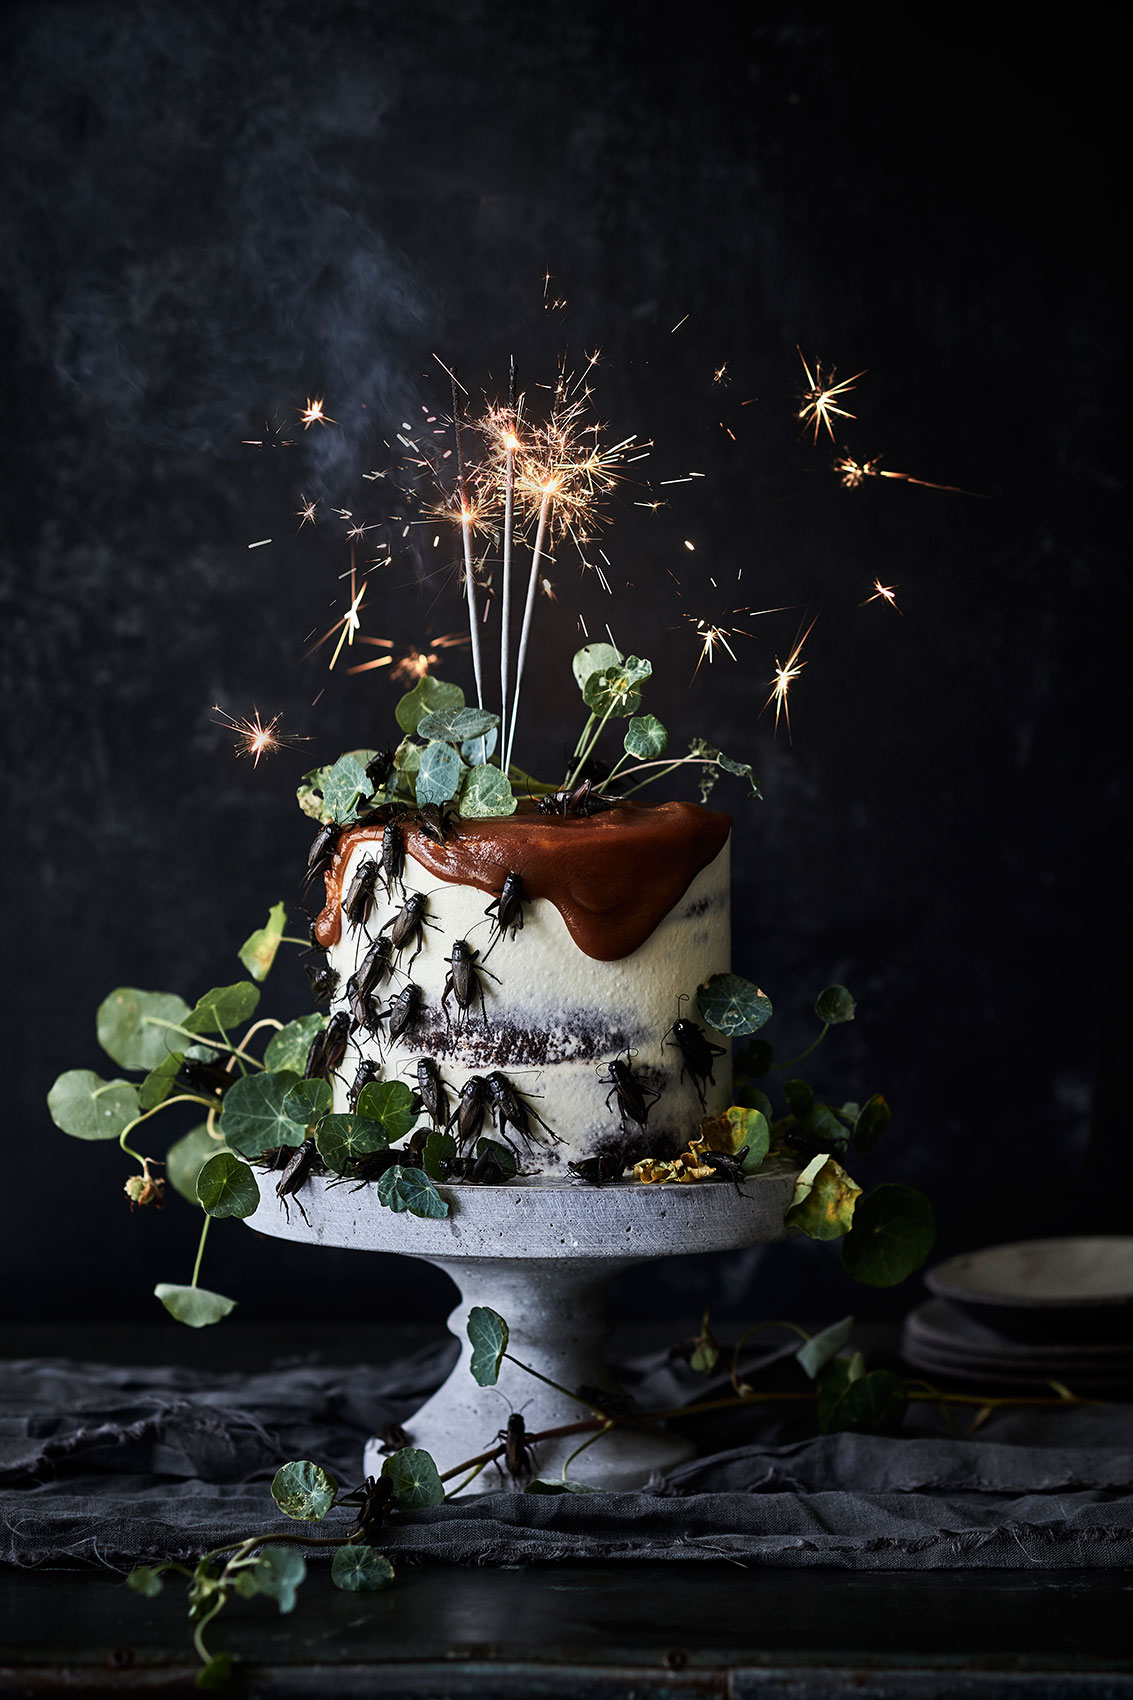 The Bug Project 2.0 • Cricket Cake with Sparklers & Chocolate Icing • Advertising & Fine Art Food Photography